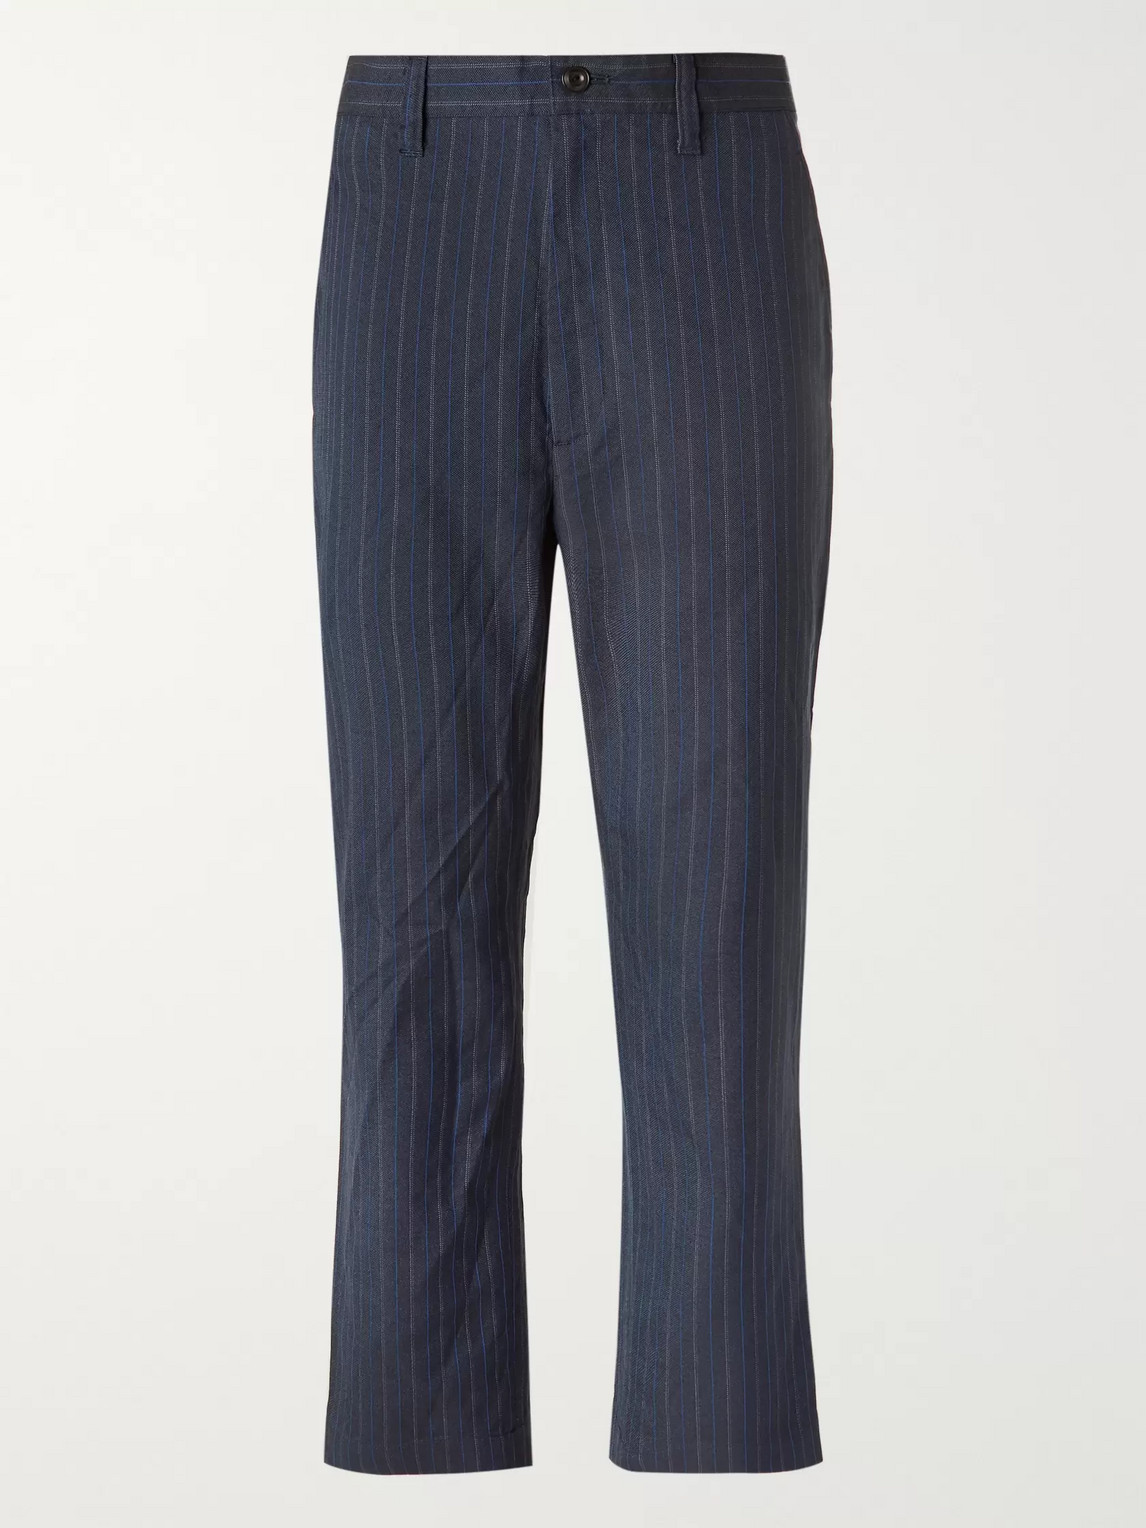 JUNYA WATANABE GARMENT-DYED PINSTRIPED WOVEN SUIT TROUSERS